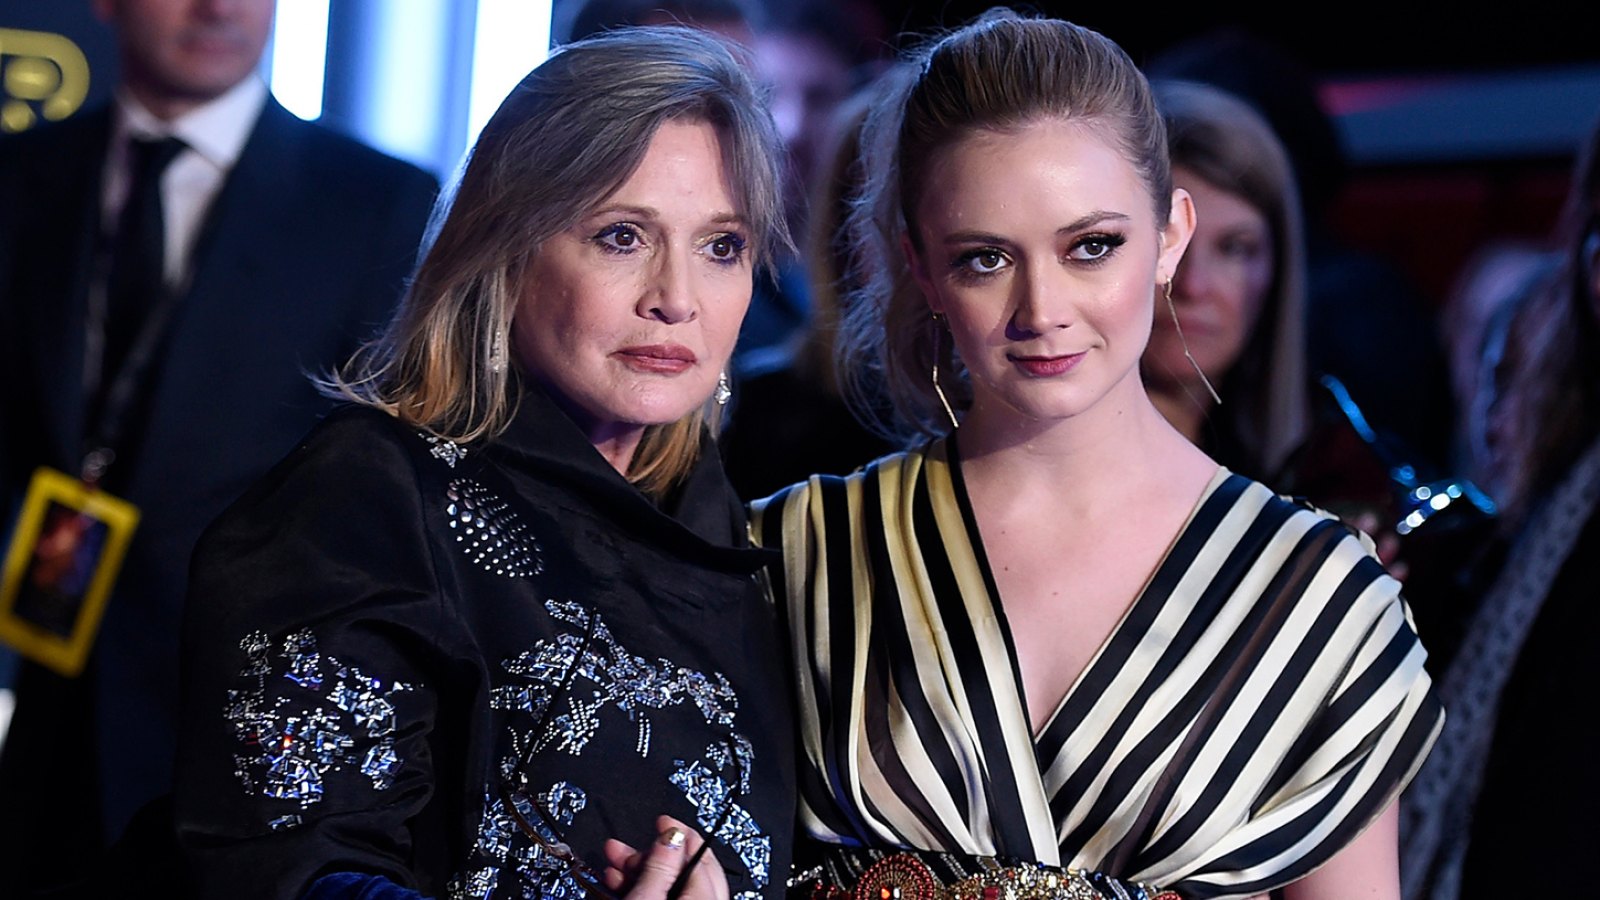 Billie Lourd Explains How Relationship With Mom Carrie Fisher Taught Her ‘What Not to Do’ Parenting